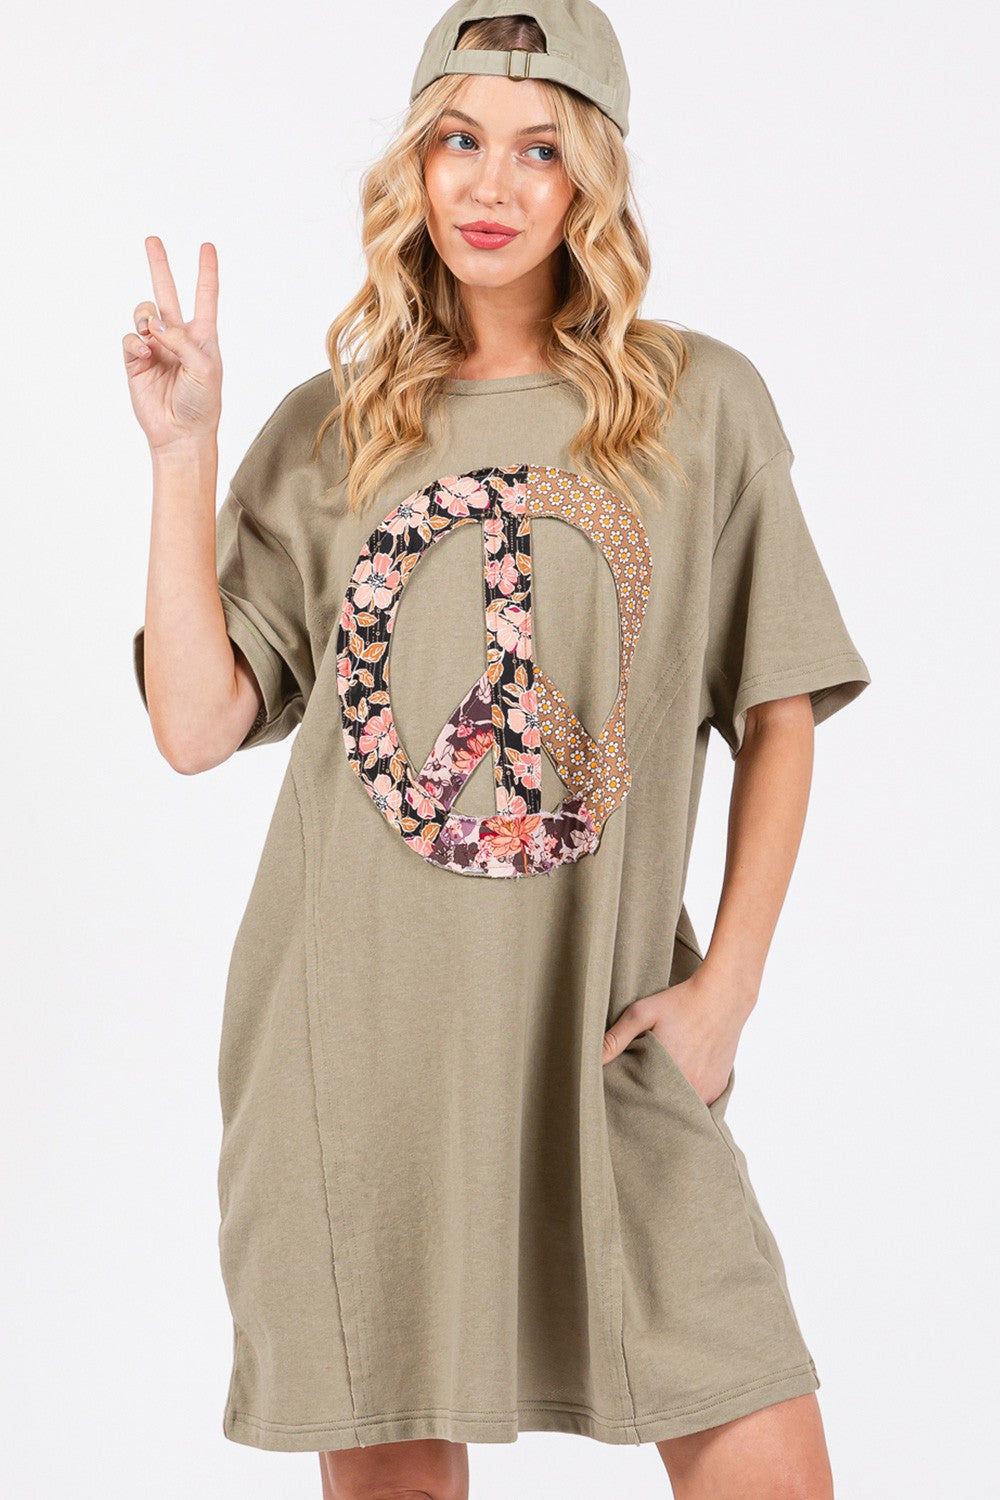 Sunset and Swim  Full Size Peace Sign Applique Short Sleeve Tee Dress Sunset and Swim   